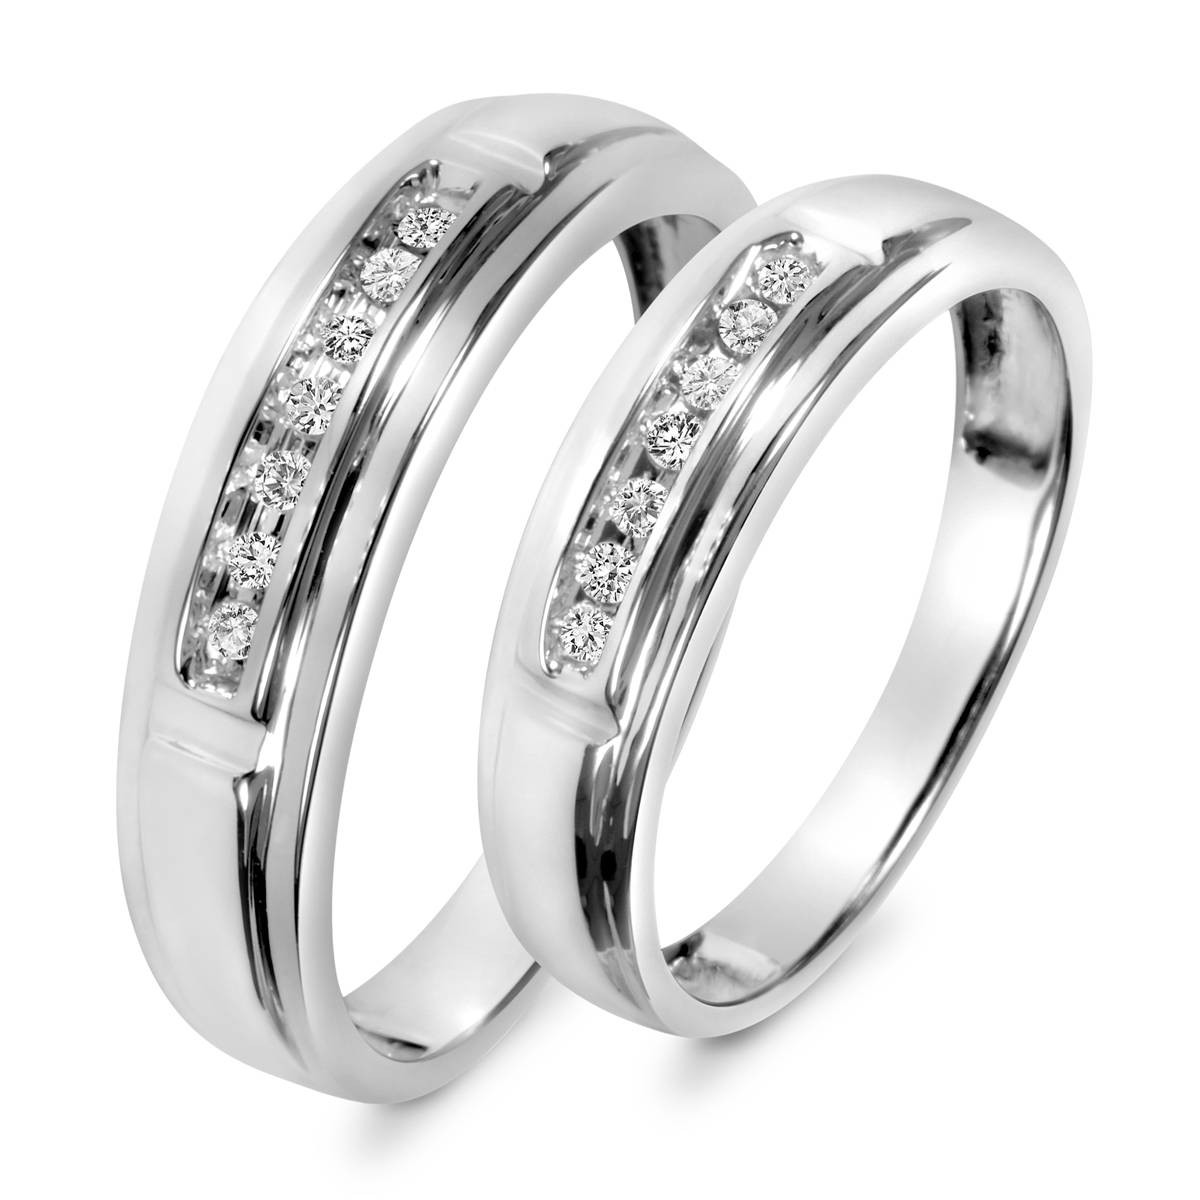 Wedding Ring Sets For Him And Her Cheap
 15 Inspirations of Cheap Wedding Bands Sets His And Hers